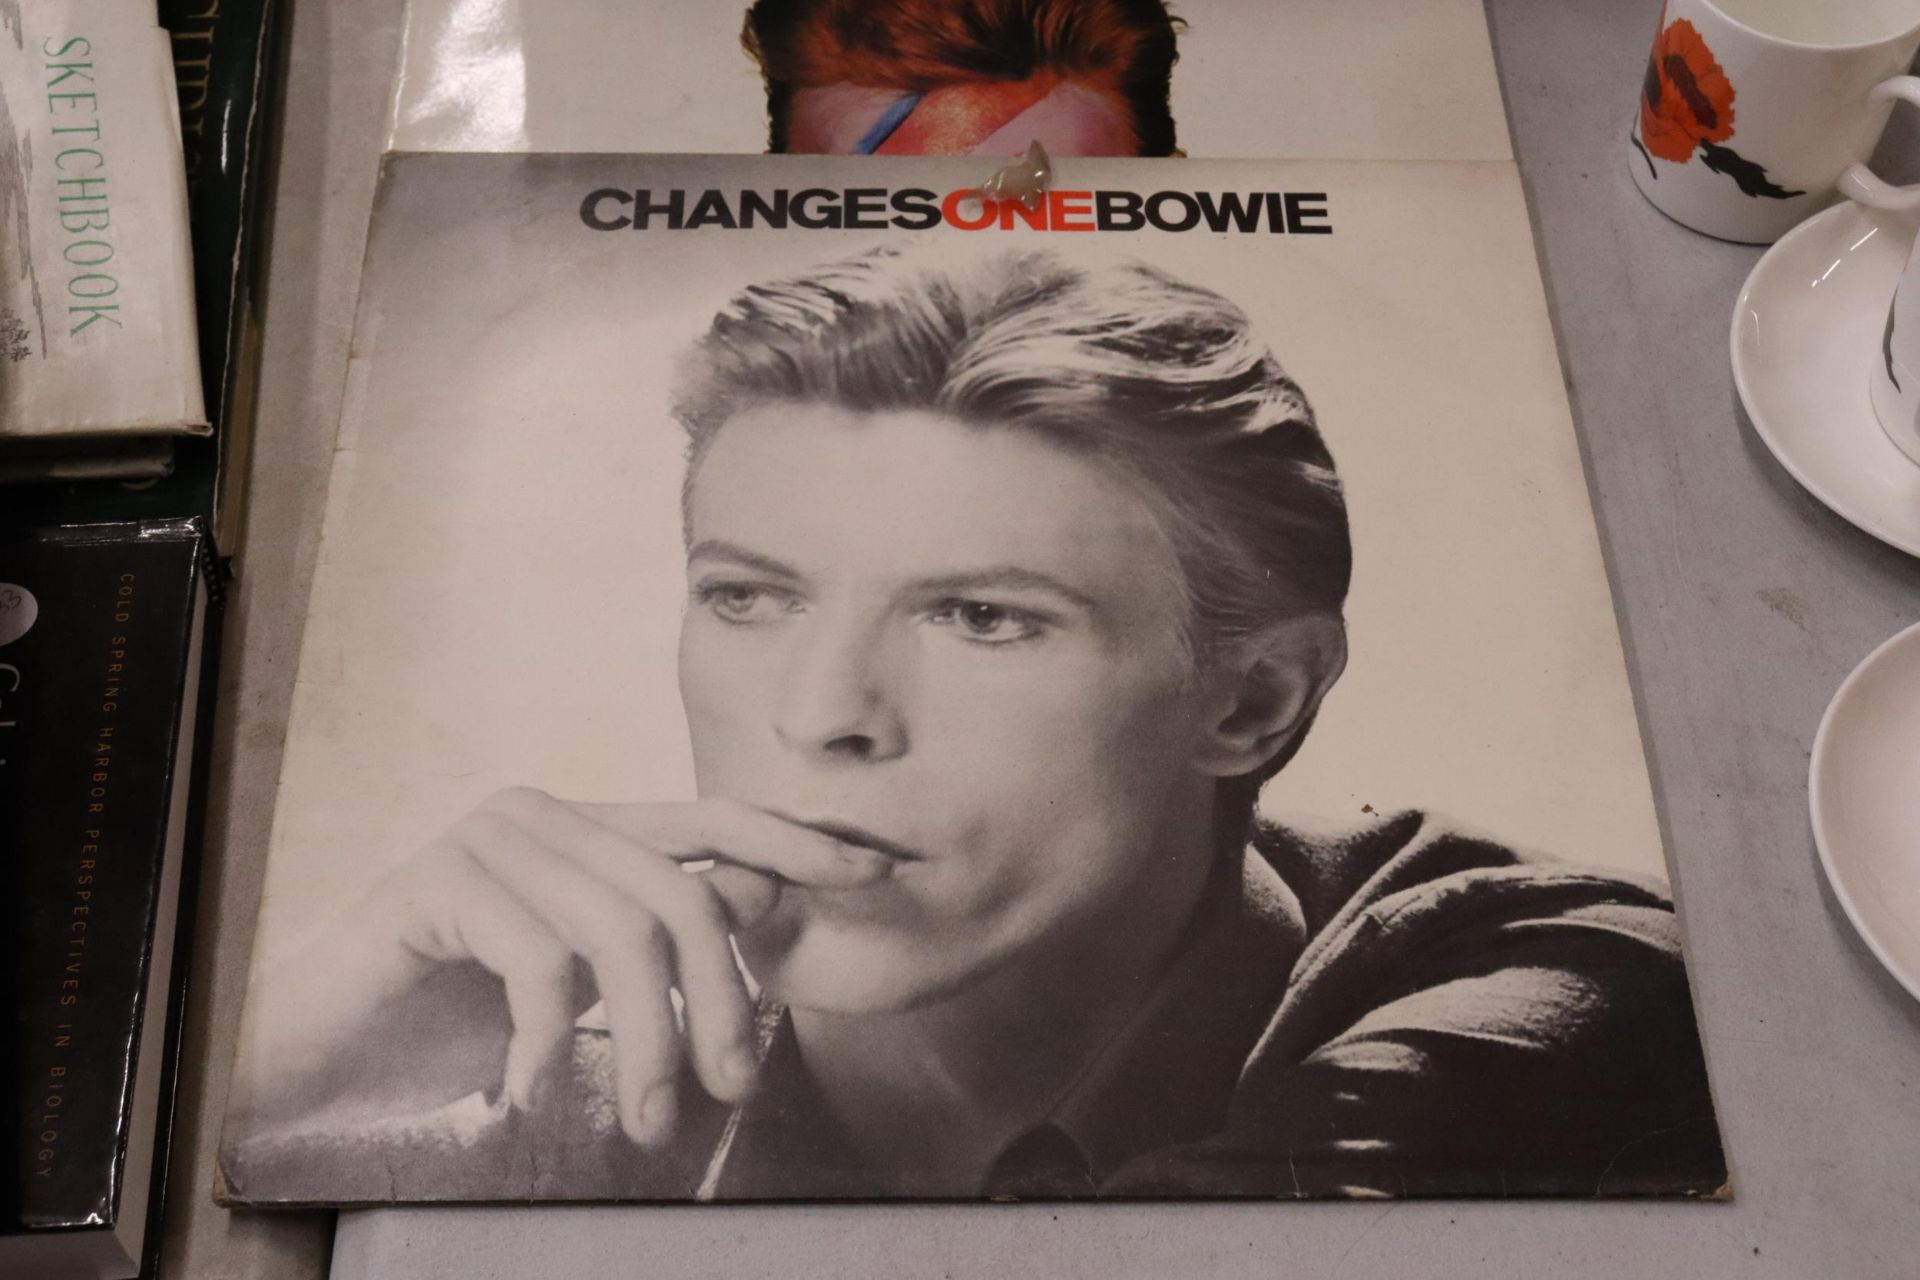 THREE DAVID BOWIE VINYL LP RECORDS TO INCLUDE DIAMOND DOGS, CHANGES ONE BOWIE AND ALADDIN SANE - Image 4 of 5